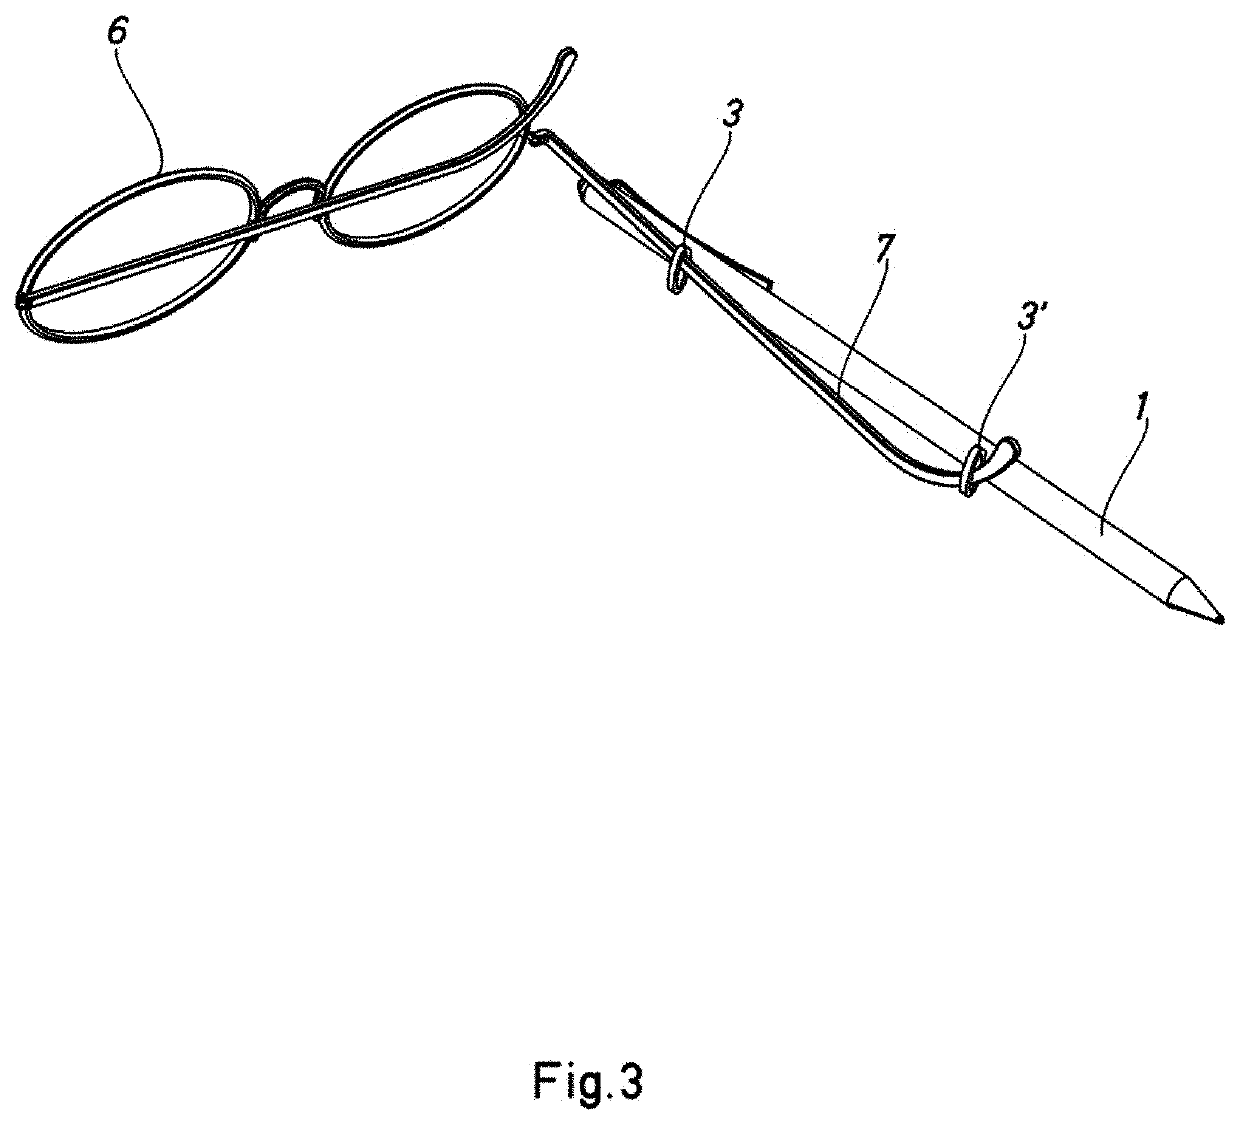 Device for attaching glasses to garments